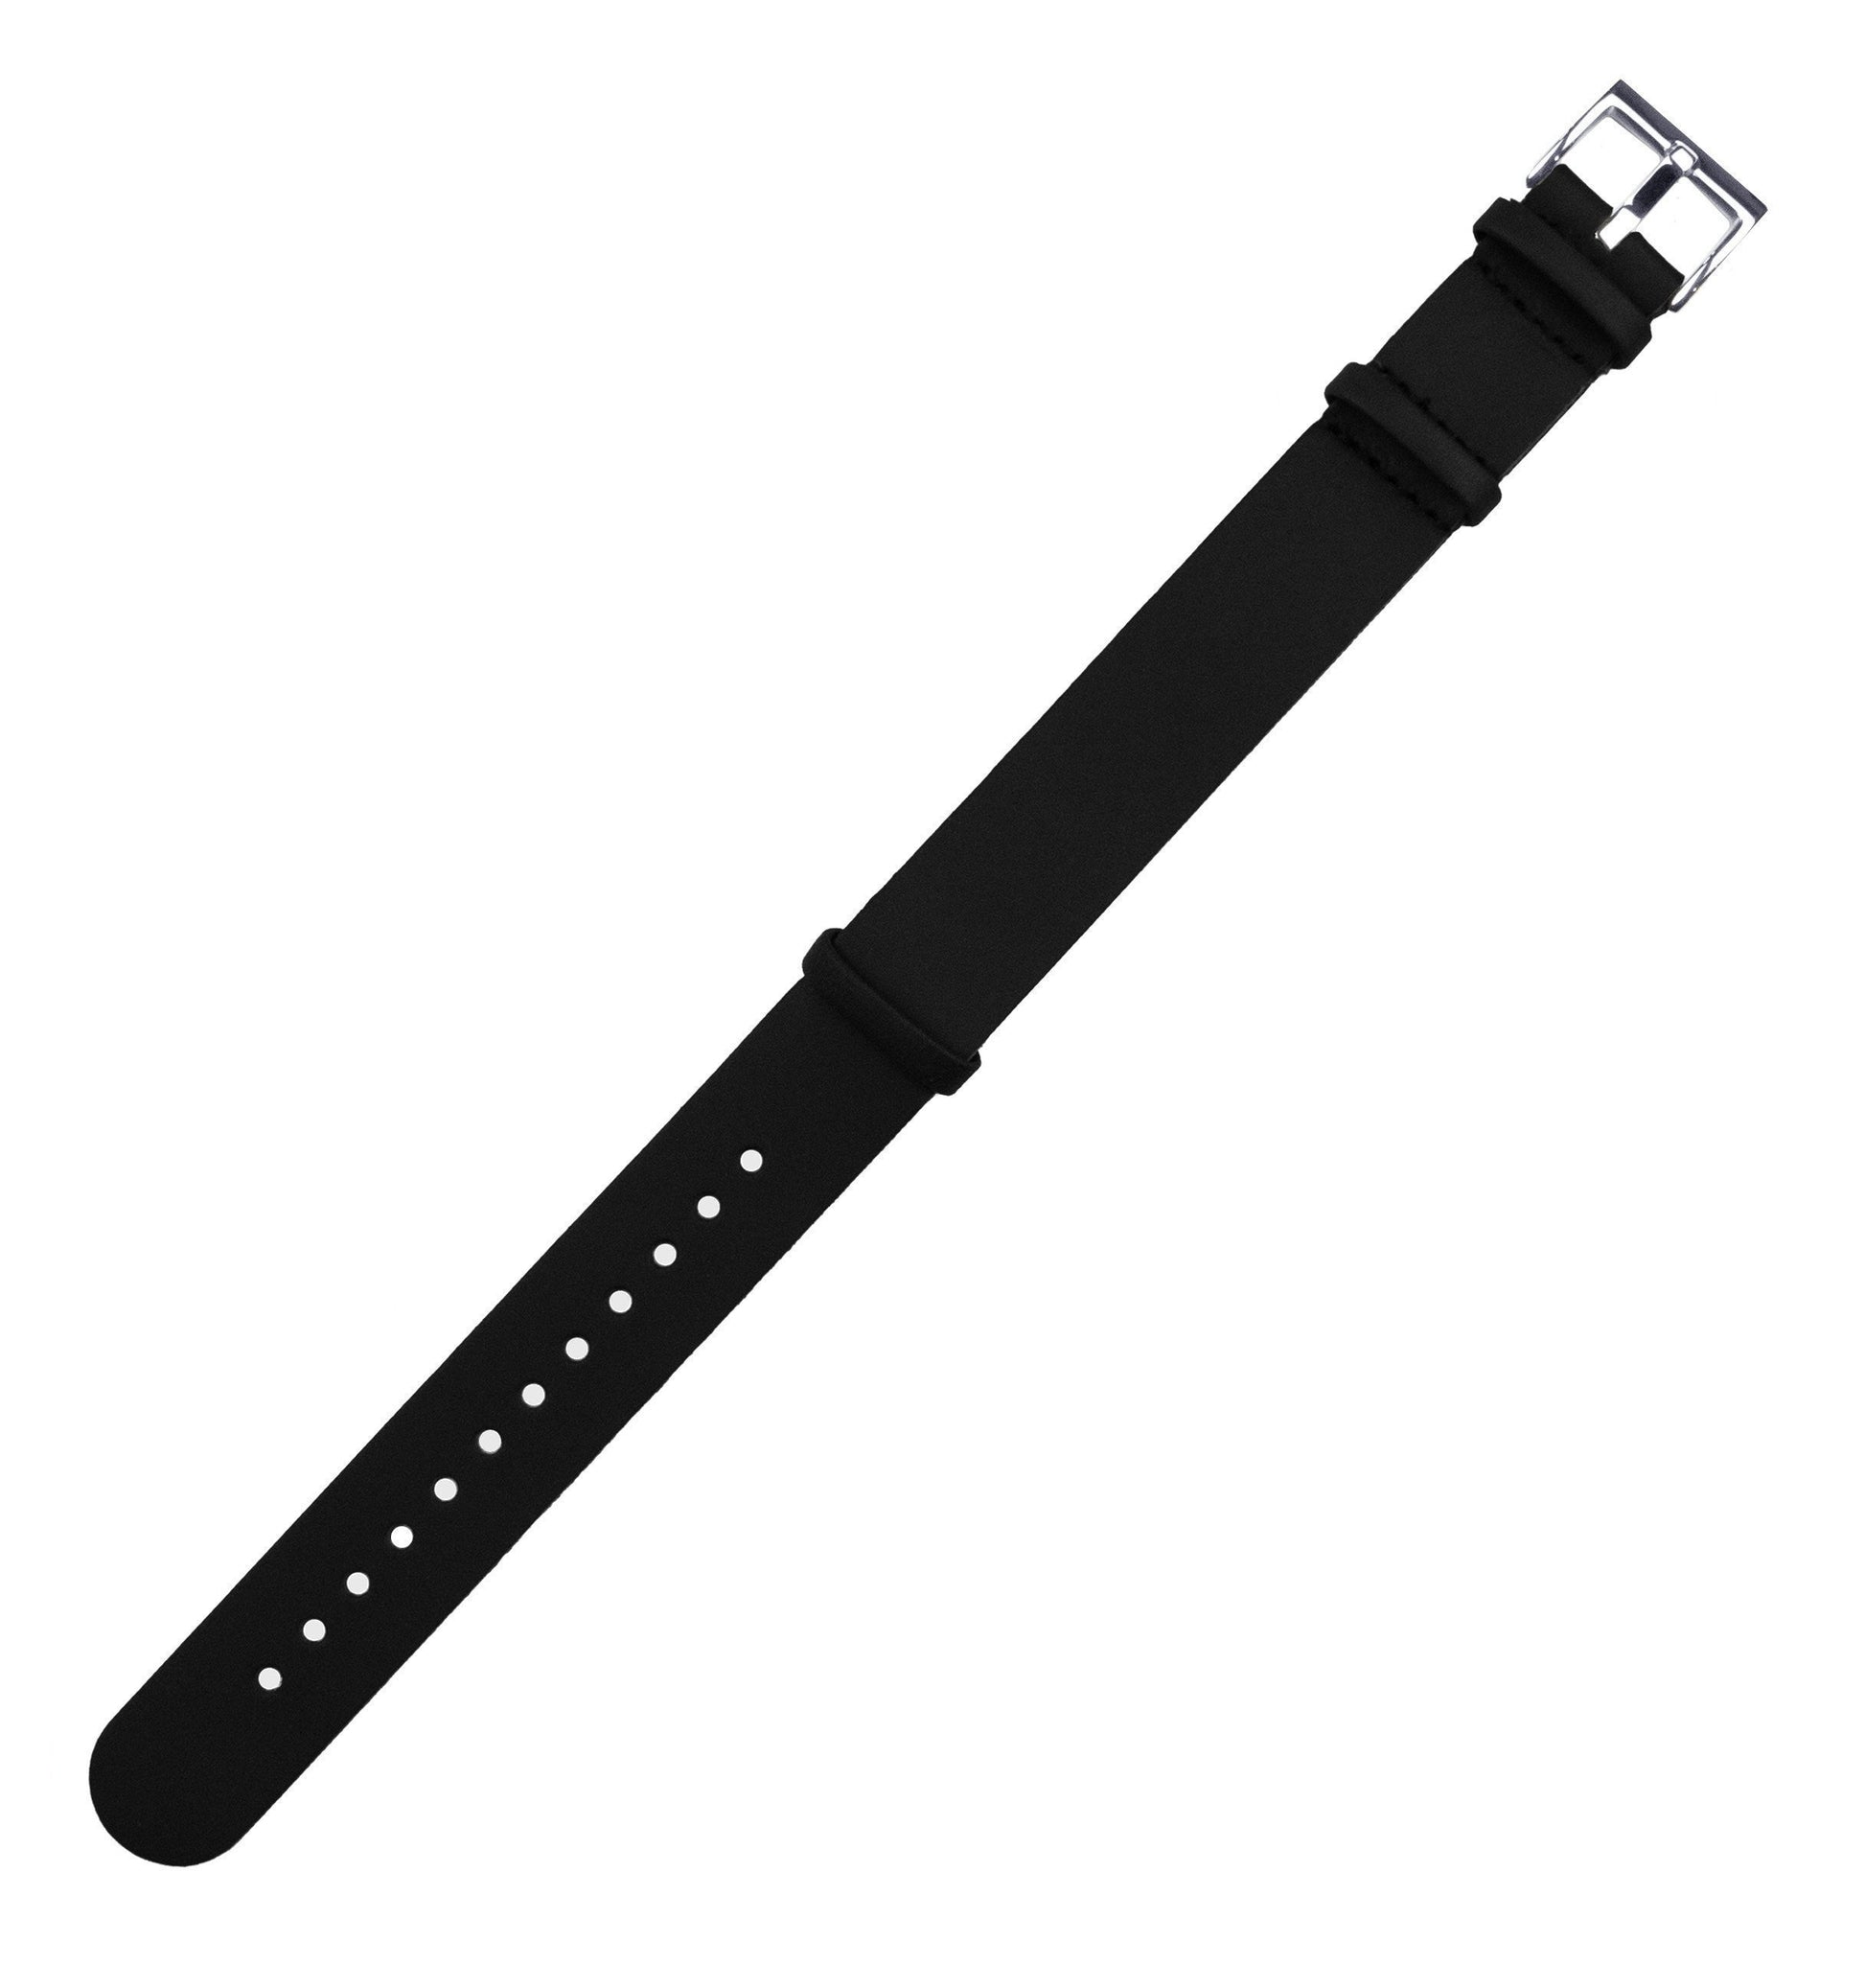 Black | Leather NATO Style - Barton Watch Bands